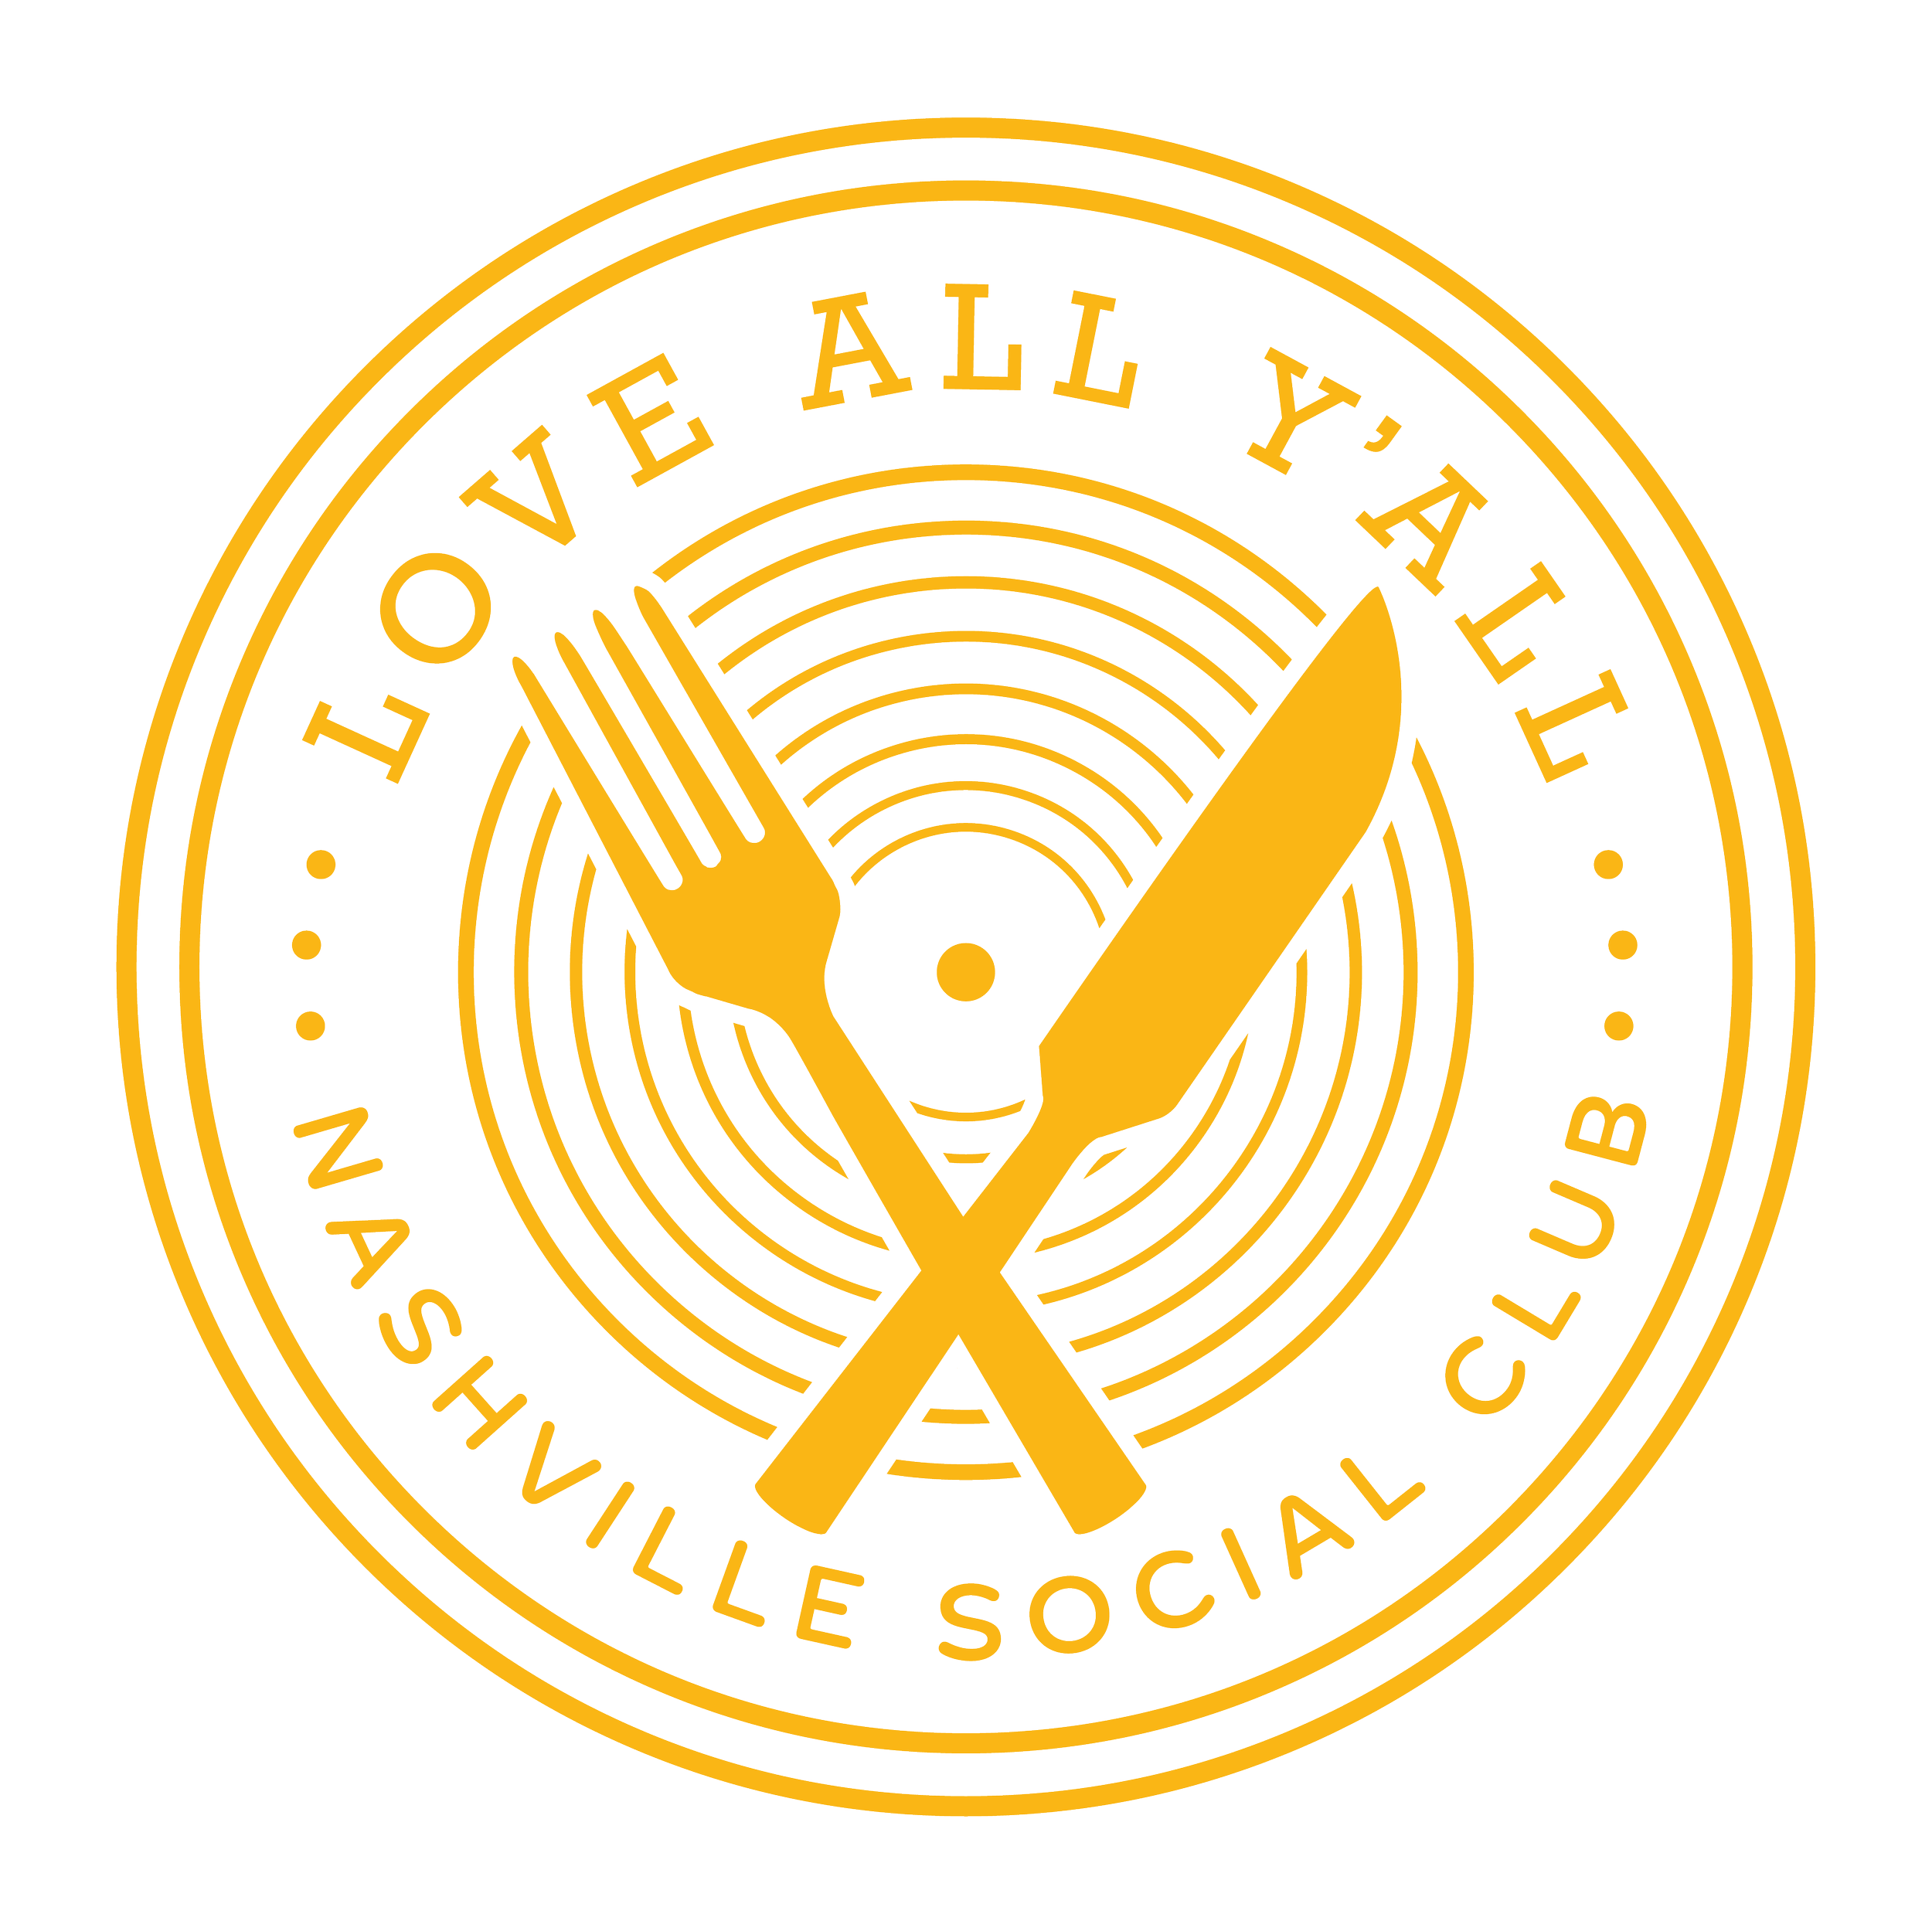 Love_All_Yall_Stamp_Design_Yellow_12x12 (1) (1).png